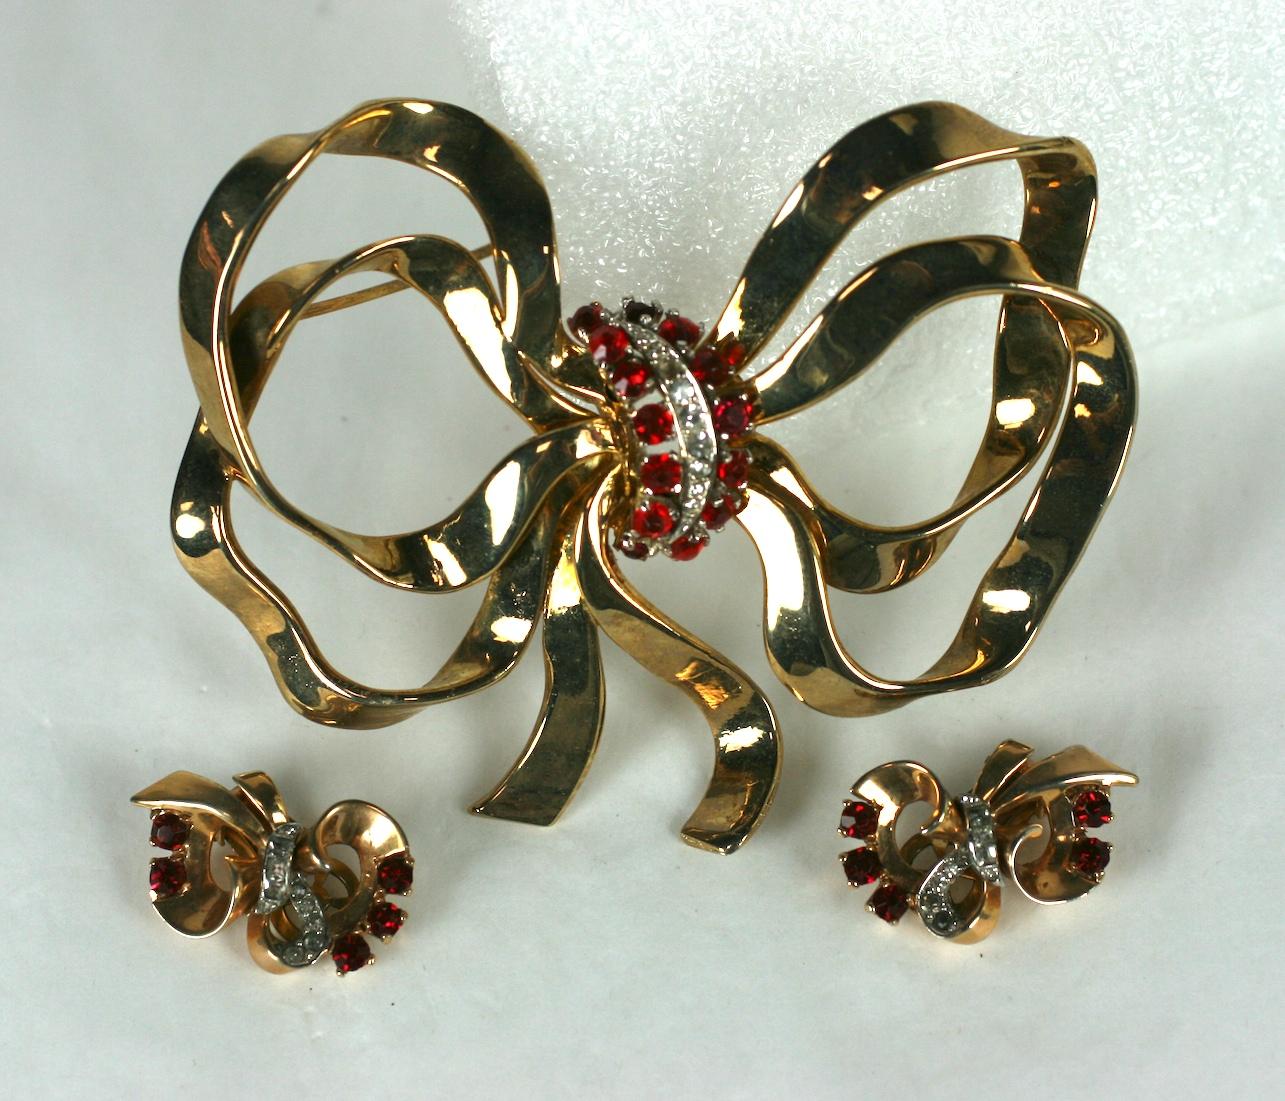 Mazer Retro massively scaled bow Retro knot brooch and matching ear clips. The multi loop bow and ear clips of 14 KT yellow gold plate with crystal rhinestone pave and faux round faceted rubies.  1940's USA. 
Excellent Condition, Signed Mazer.